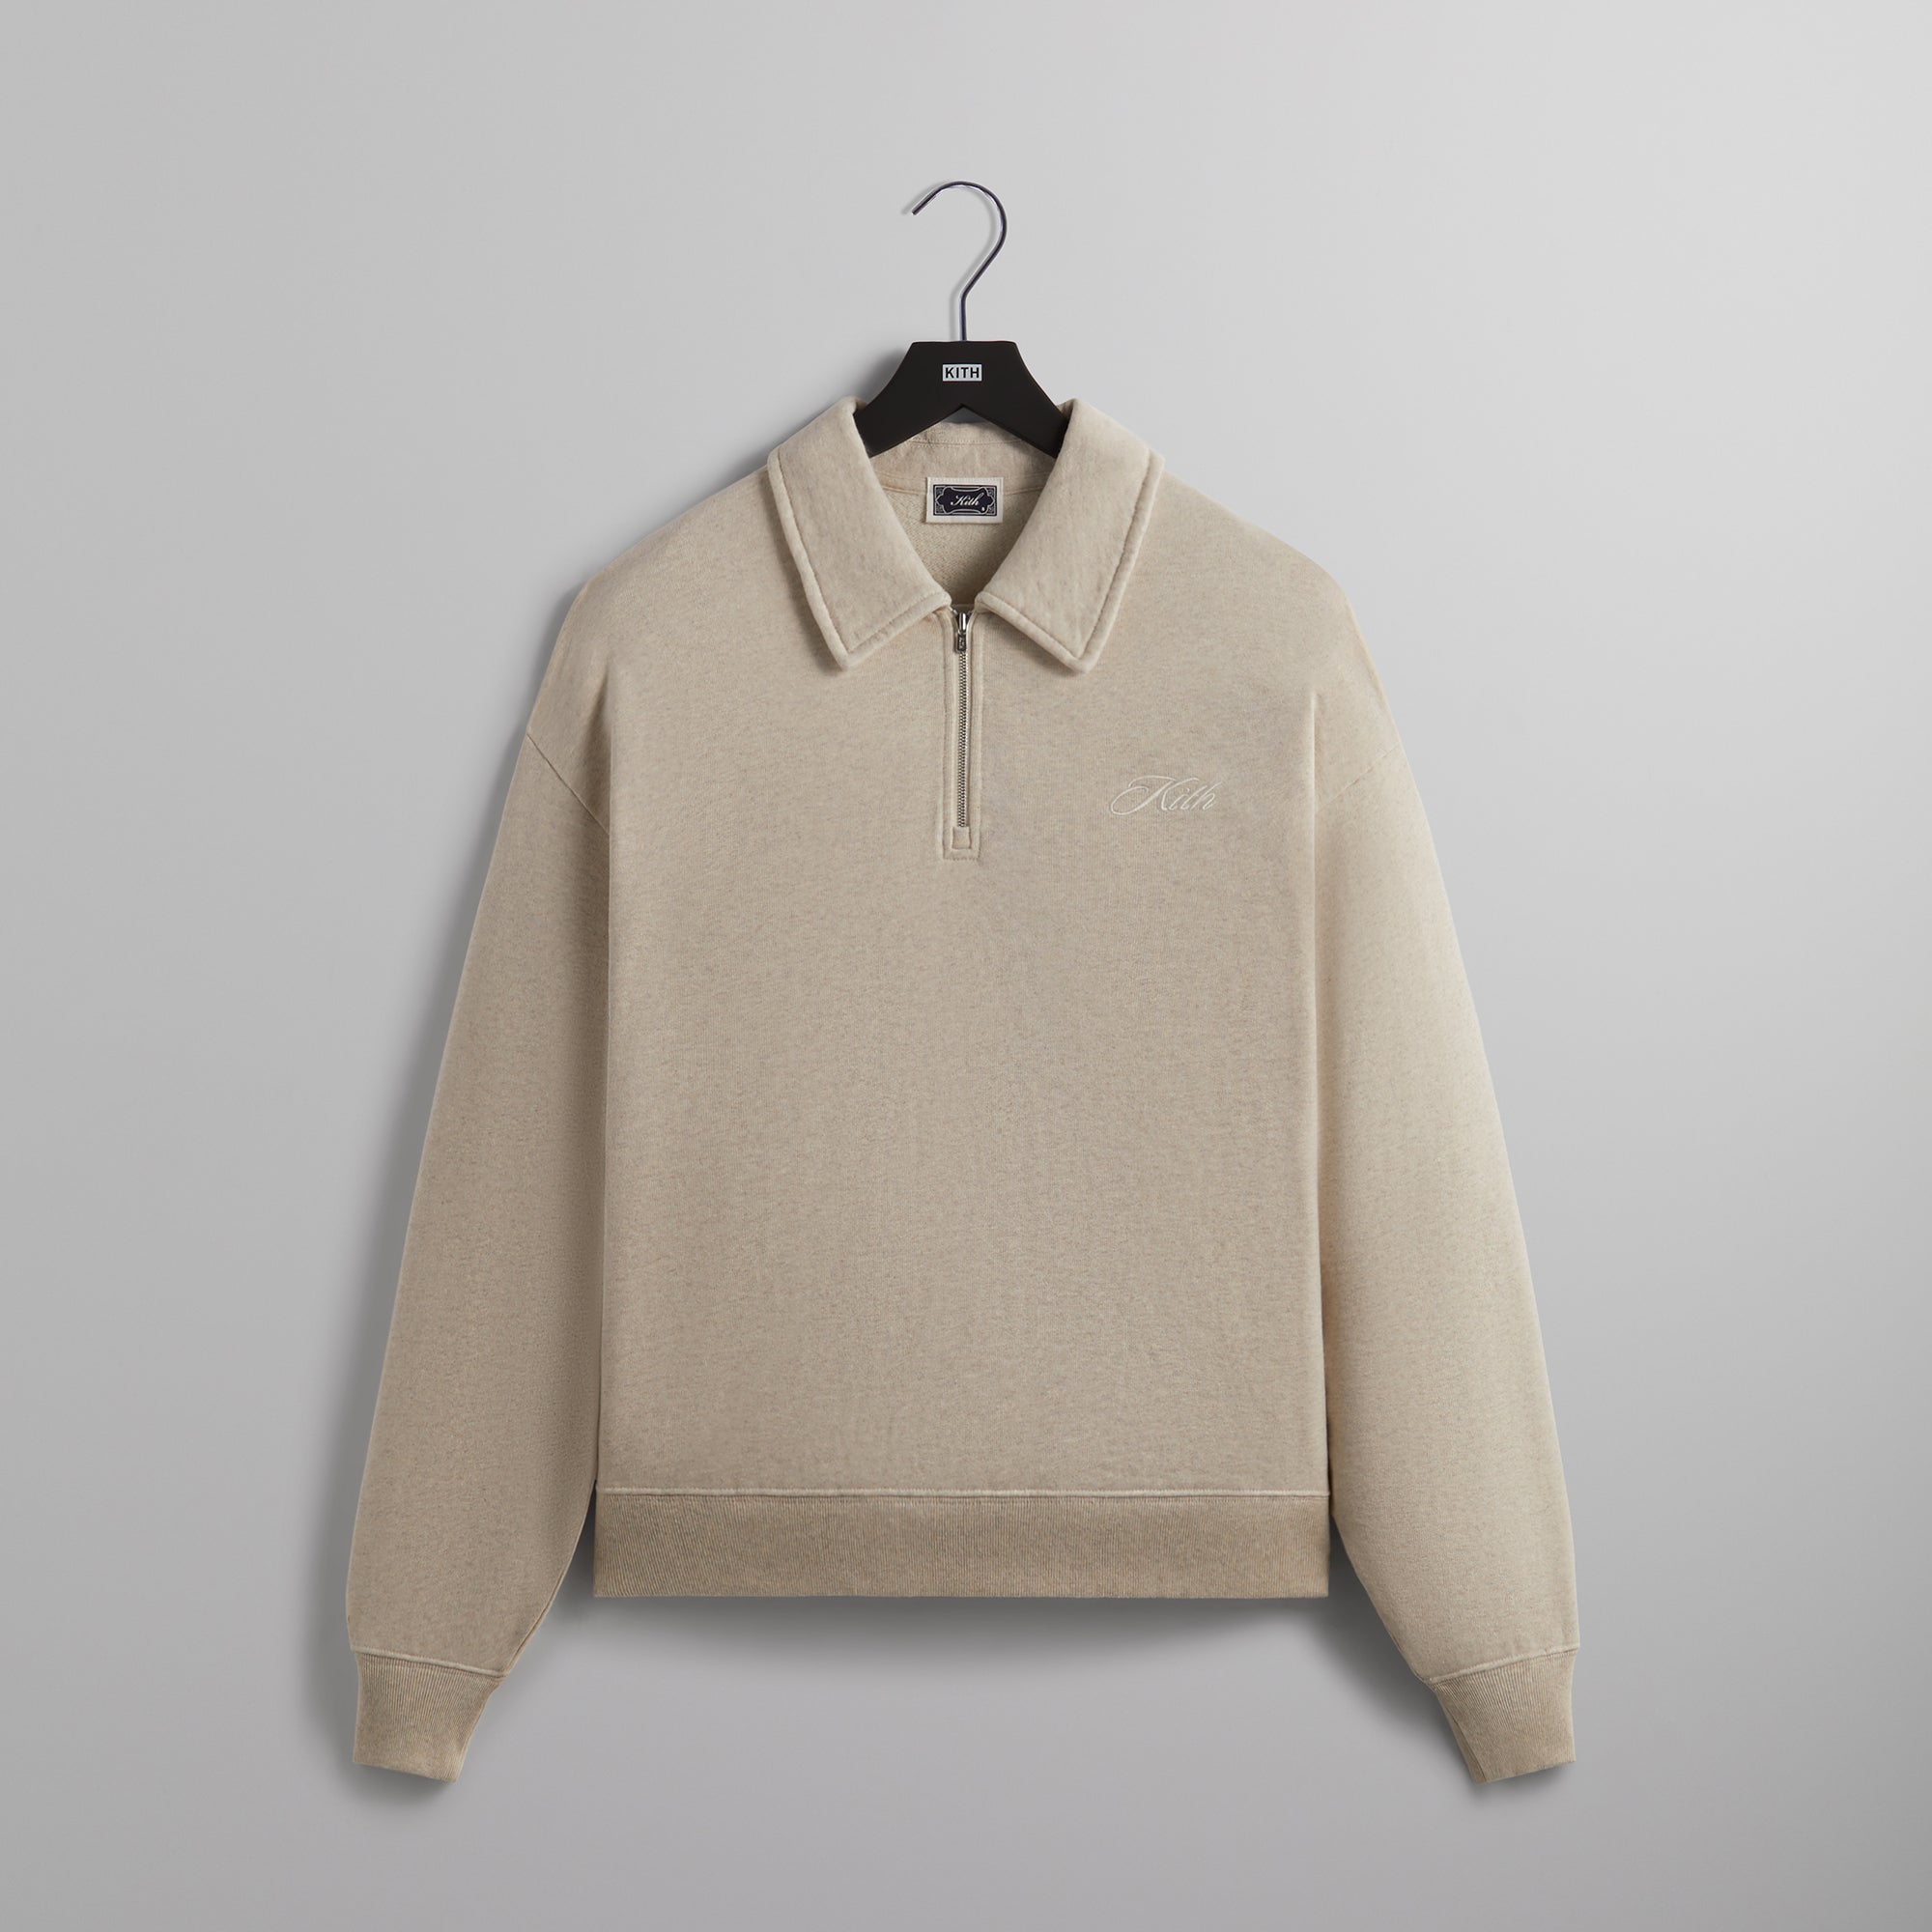 Kith Nelson Quarter Zip Rugby - Sandy Heather PH